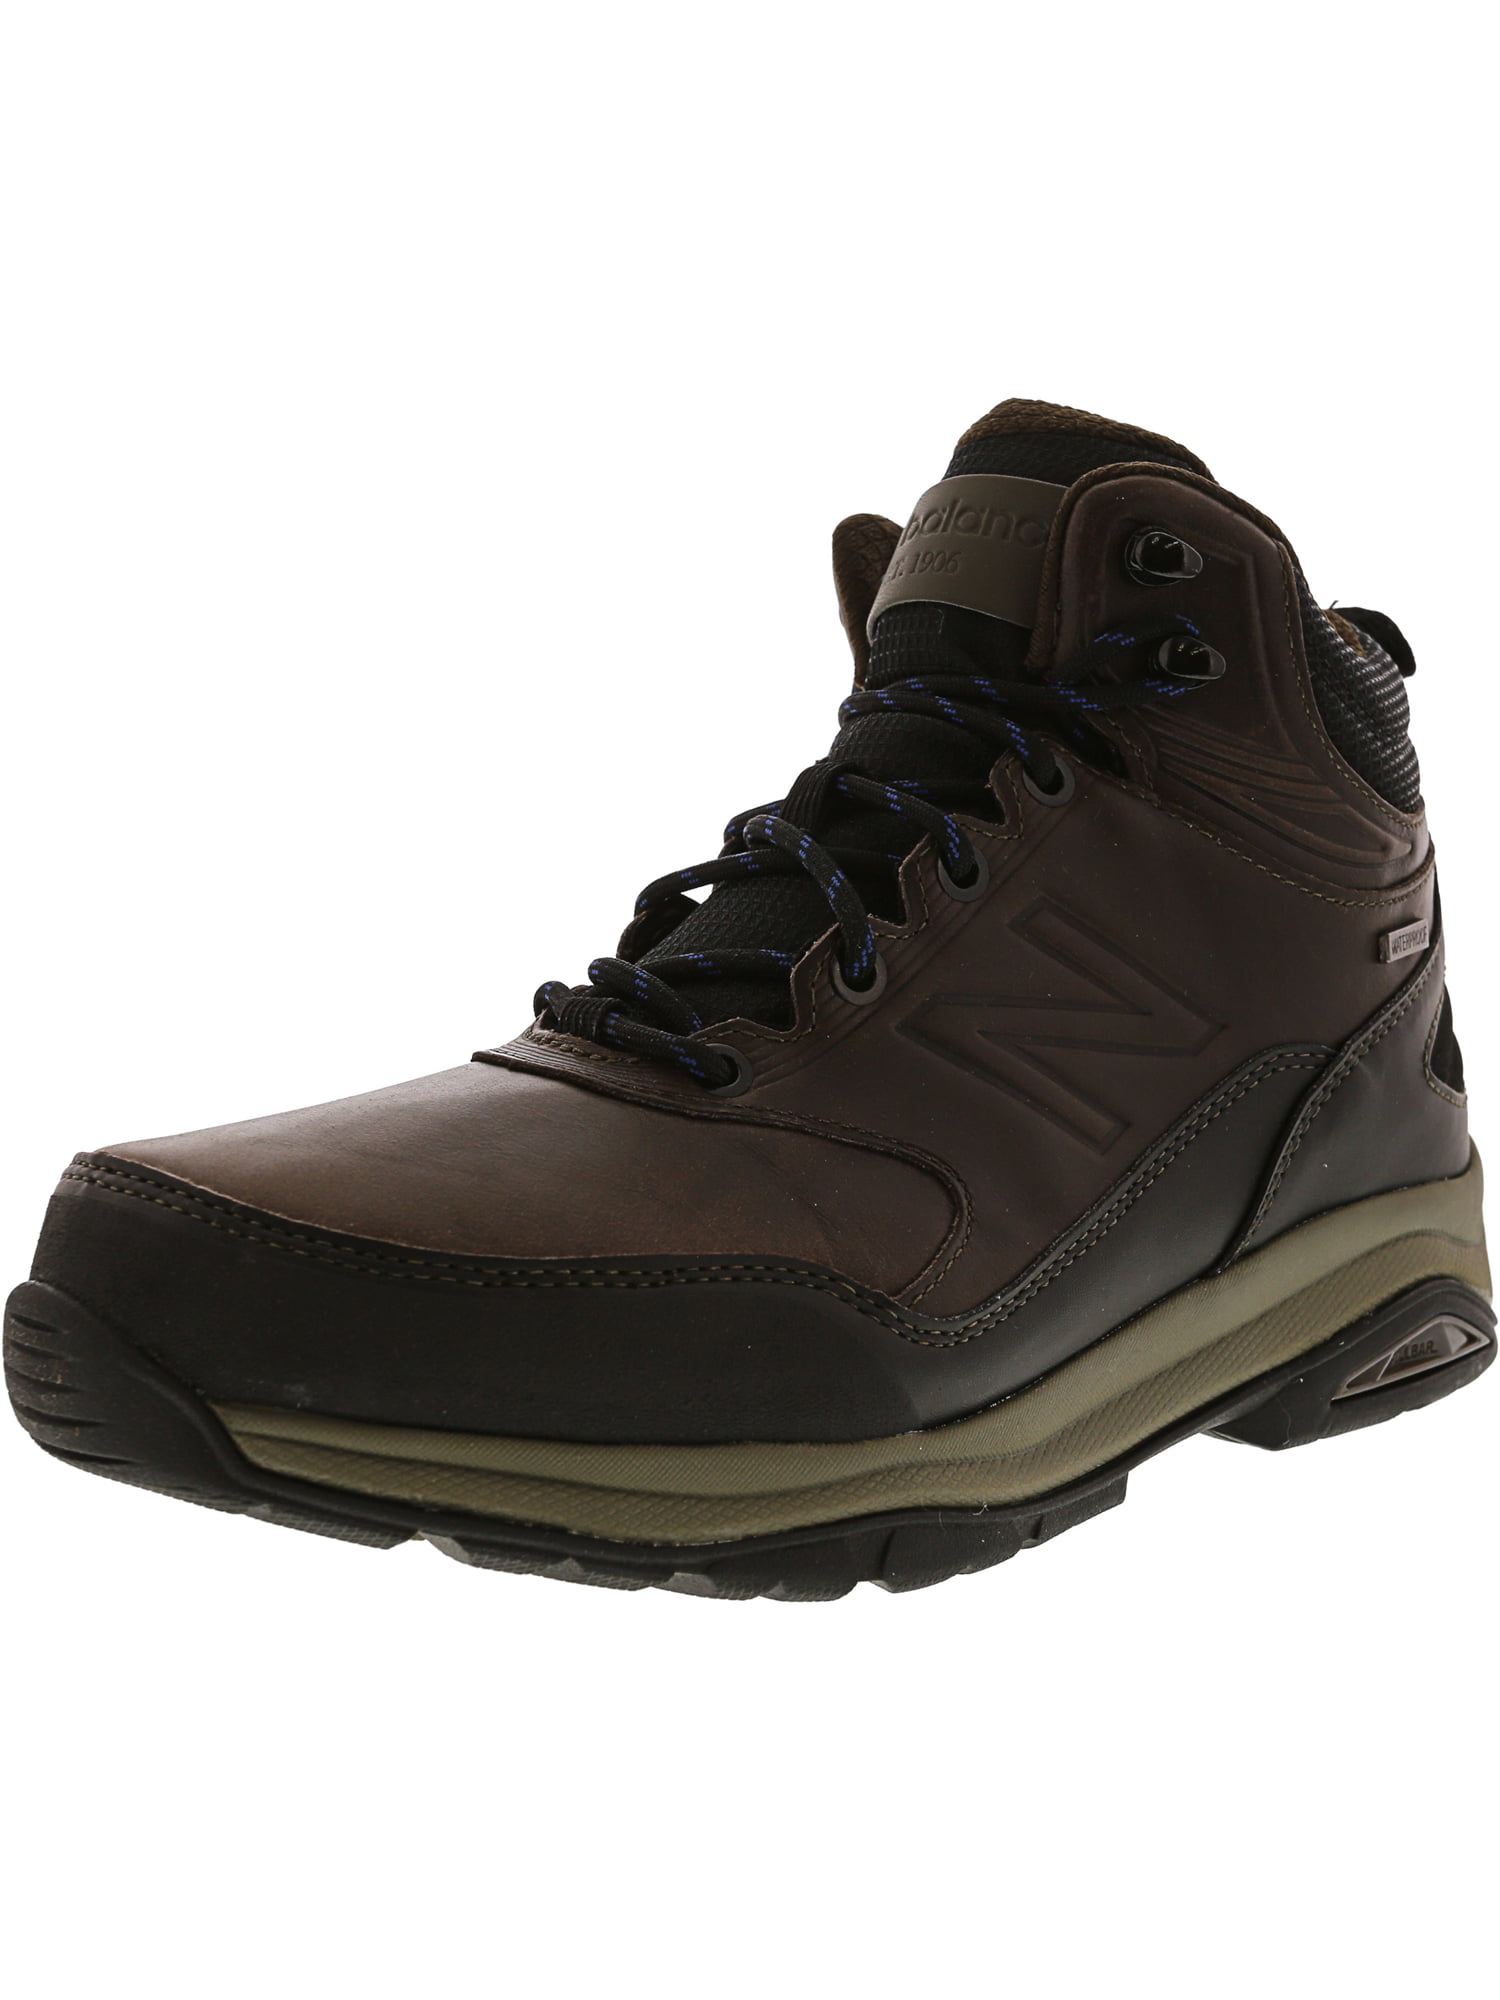 New Balance Men's Mw1400 Db Ankle-High Leather Backpacking Boot - 9.5M ...